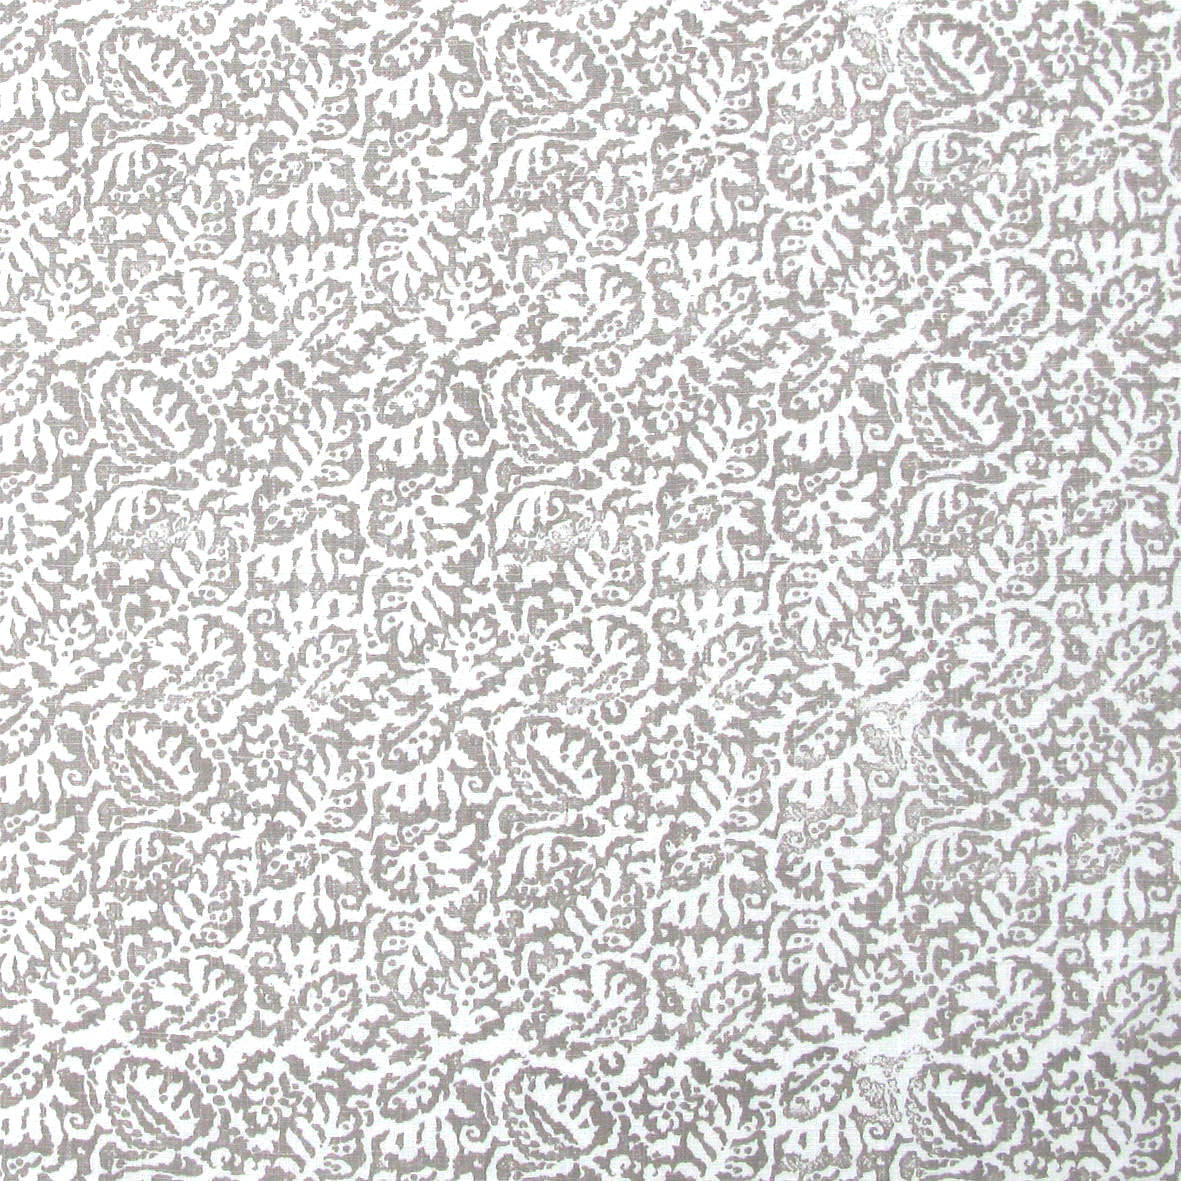 Detail of fabric in a dense paisley print in white on a mottled gray field.